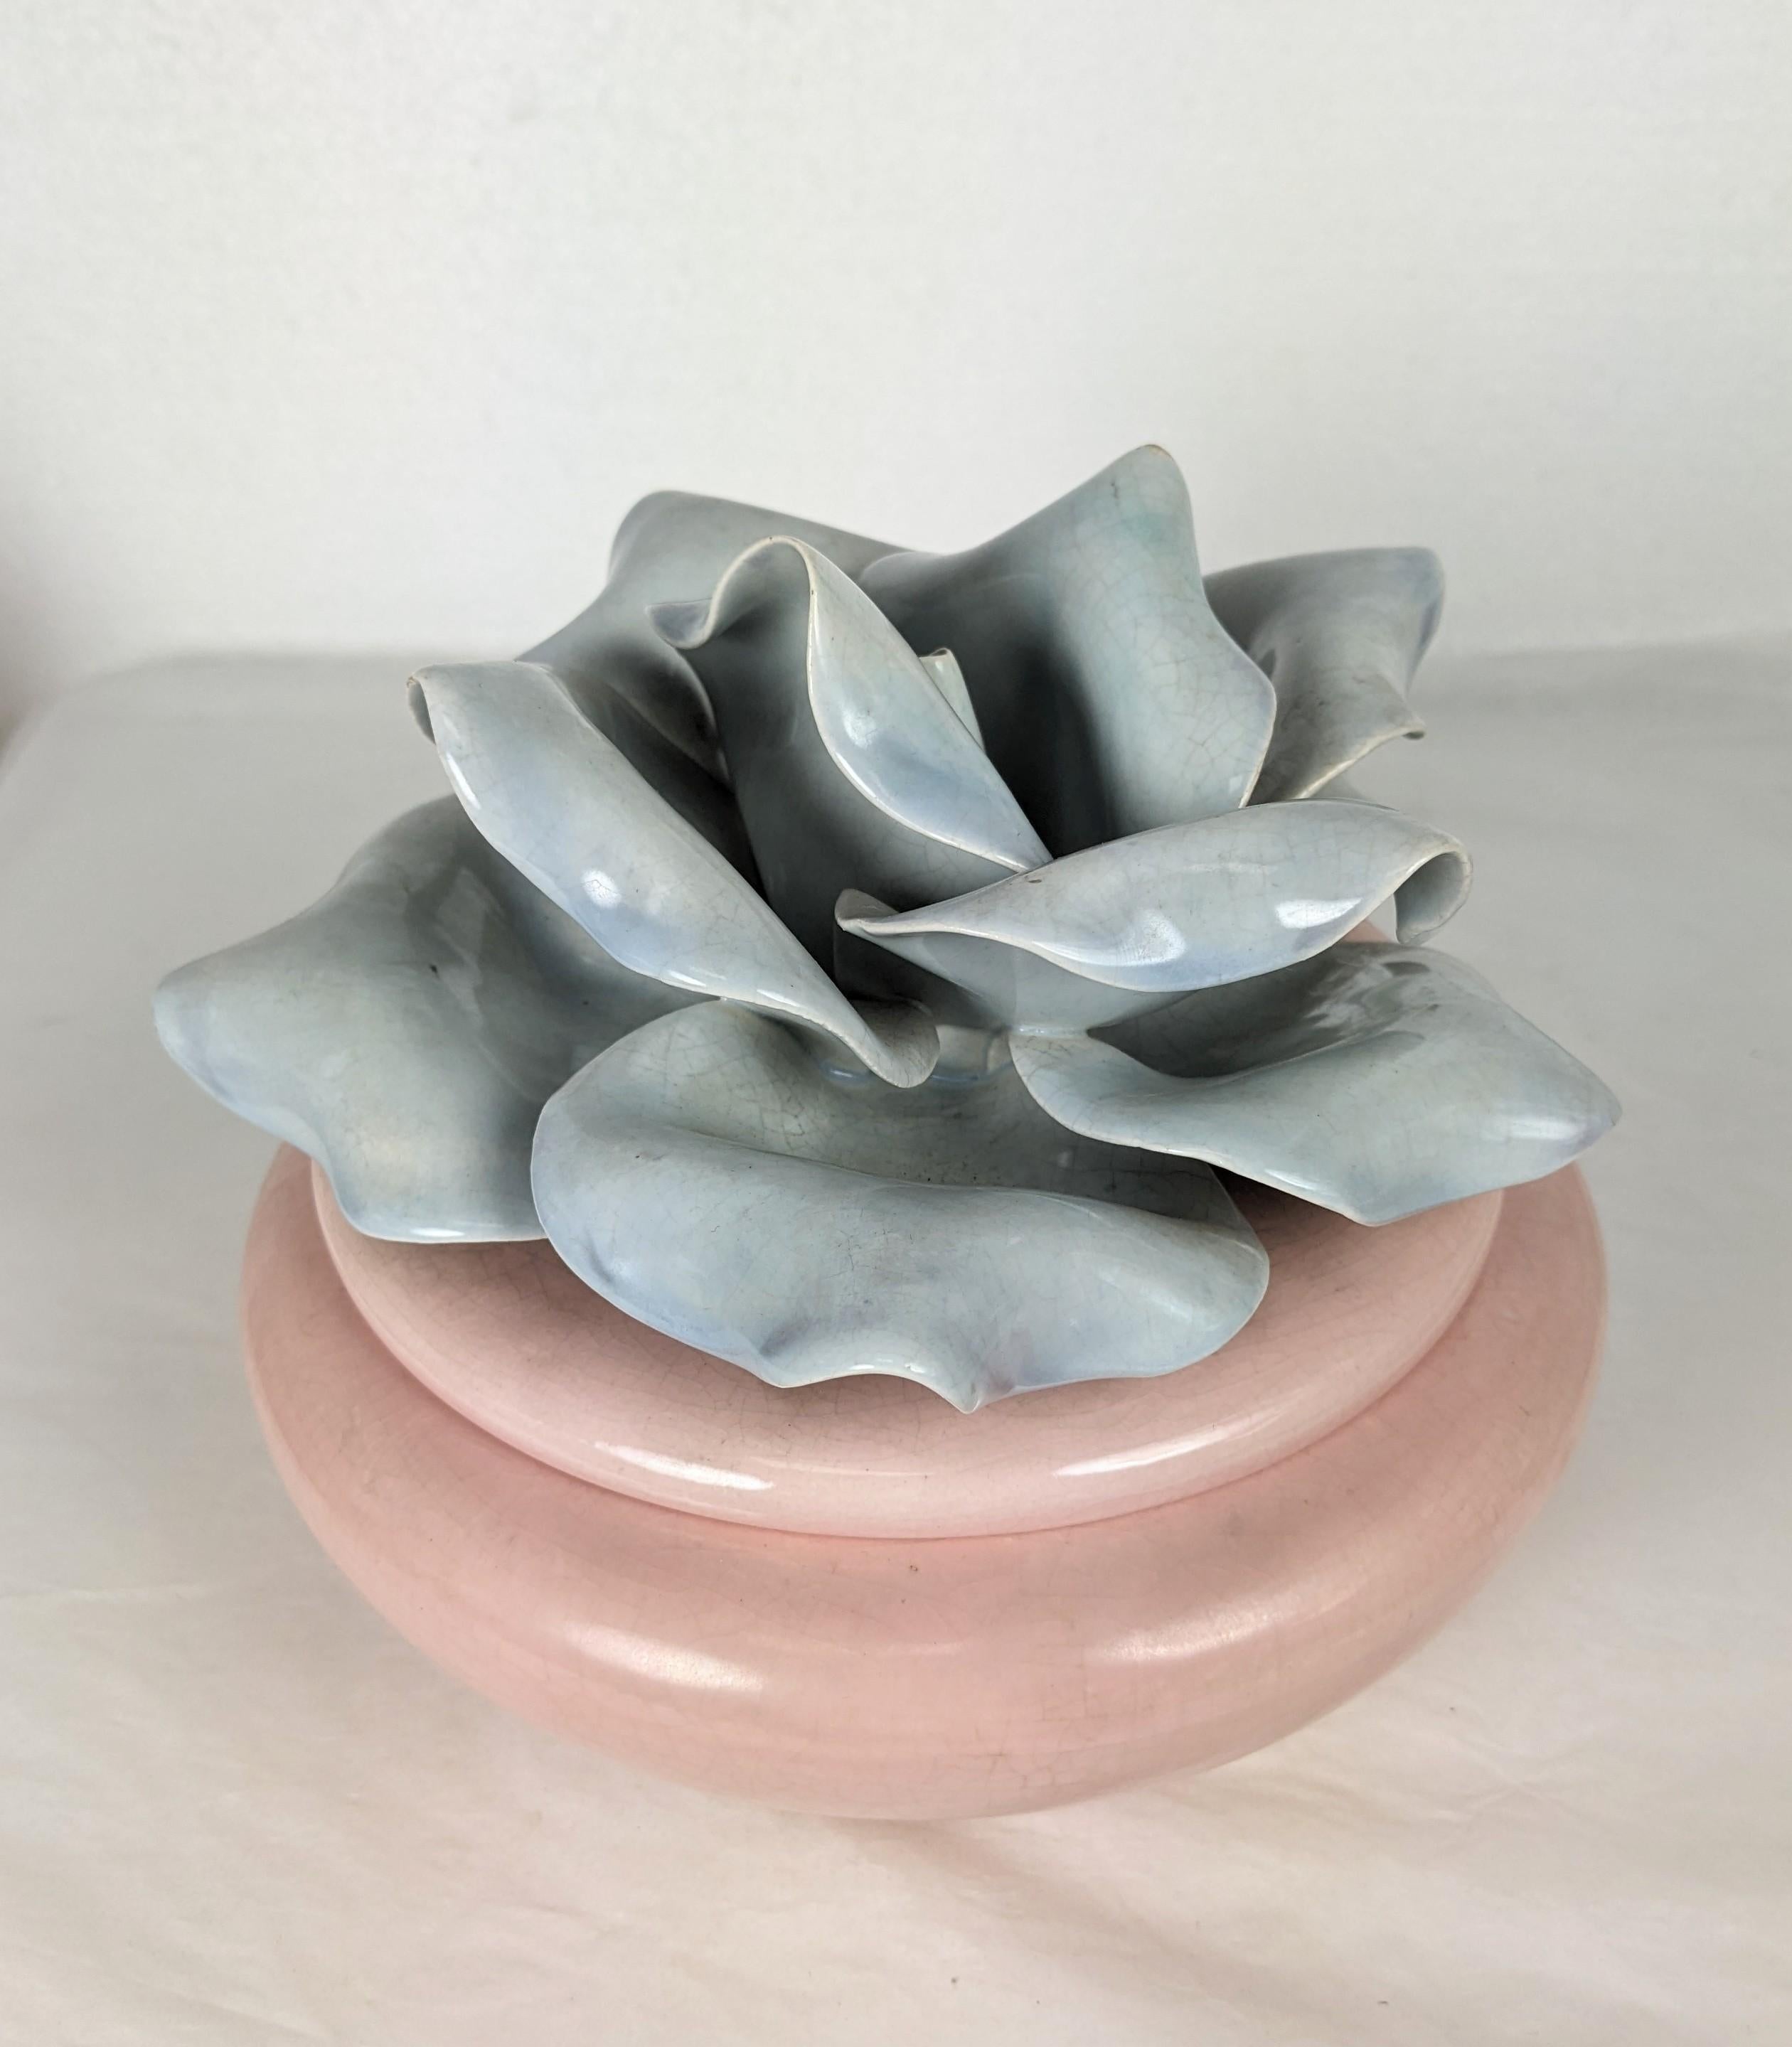 Amazing Mid Century California Pottery Rose Box from the 1950's. Massive hand formed gray pottery rose on a pink covered base. Largest one we have ever handled. 1950's USA. 